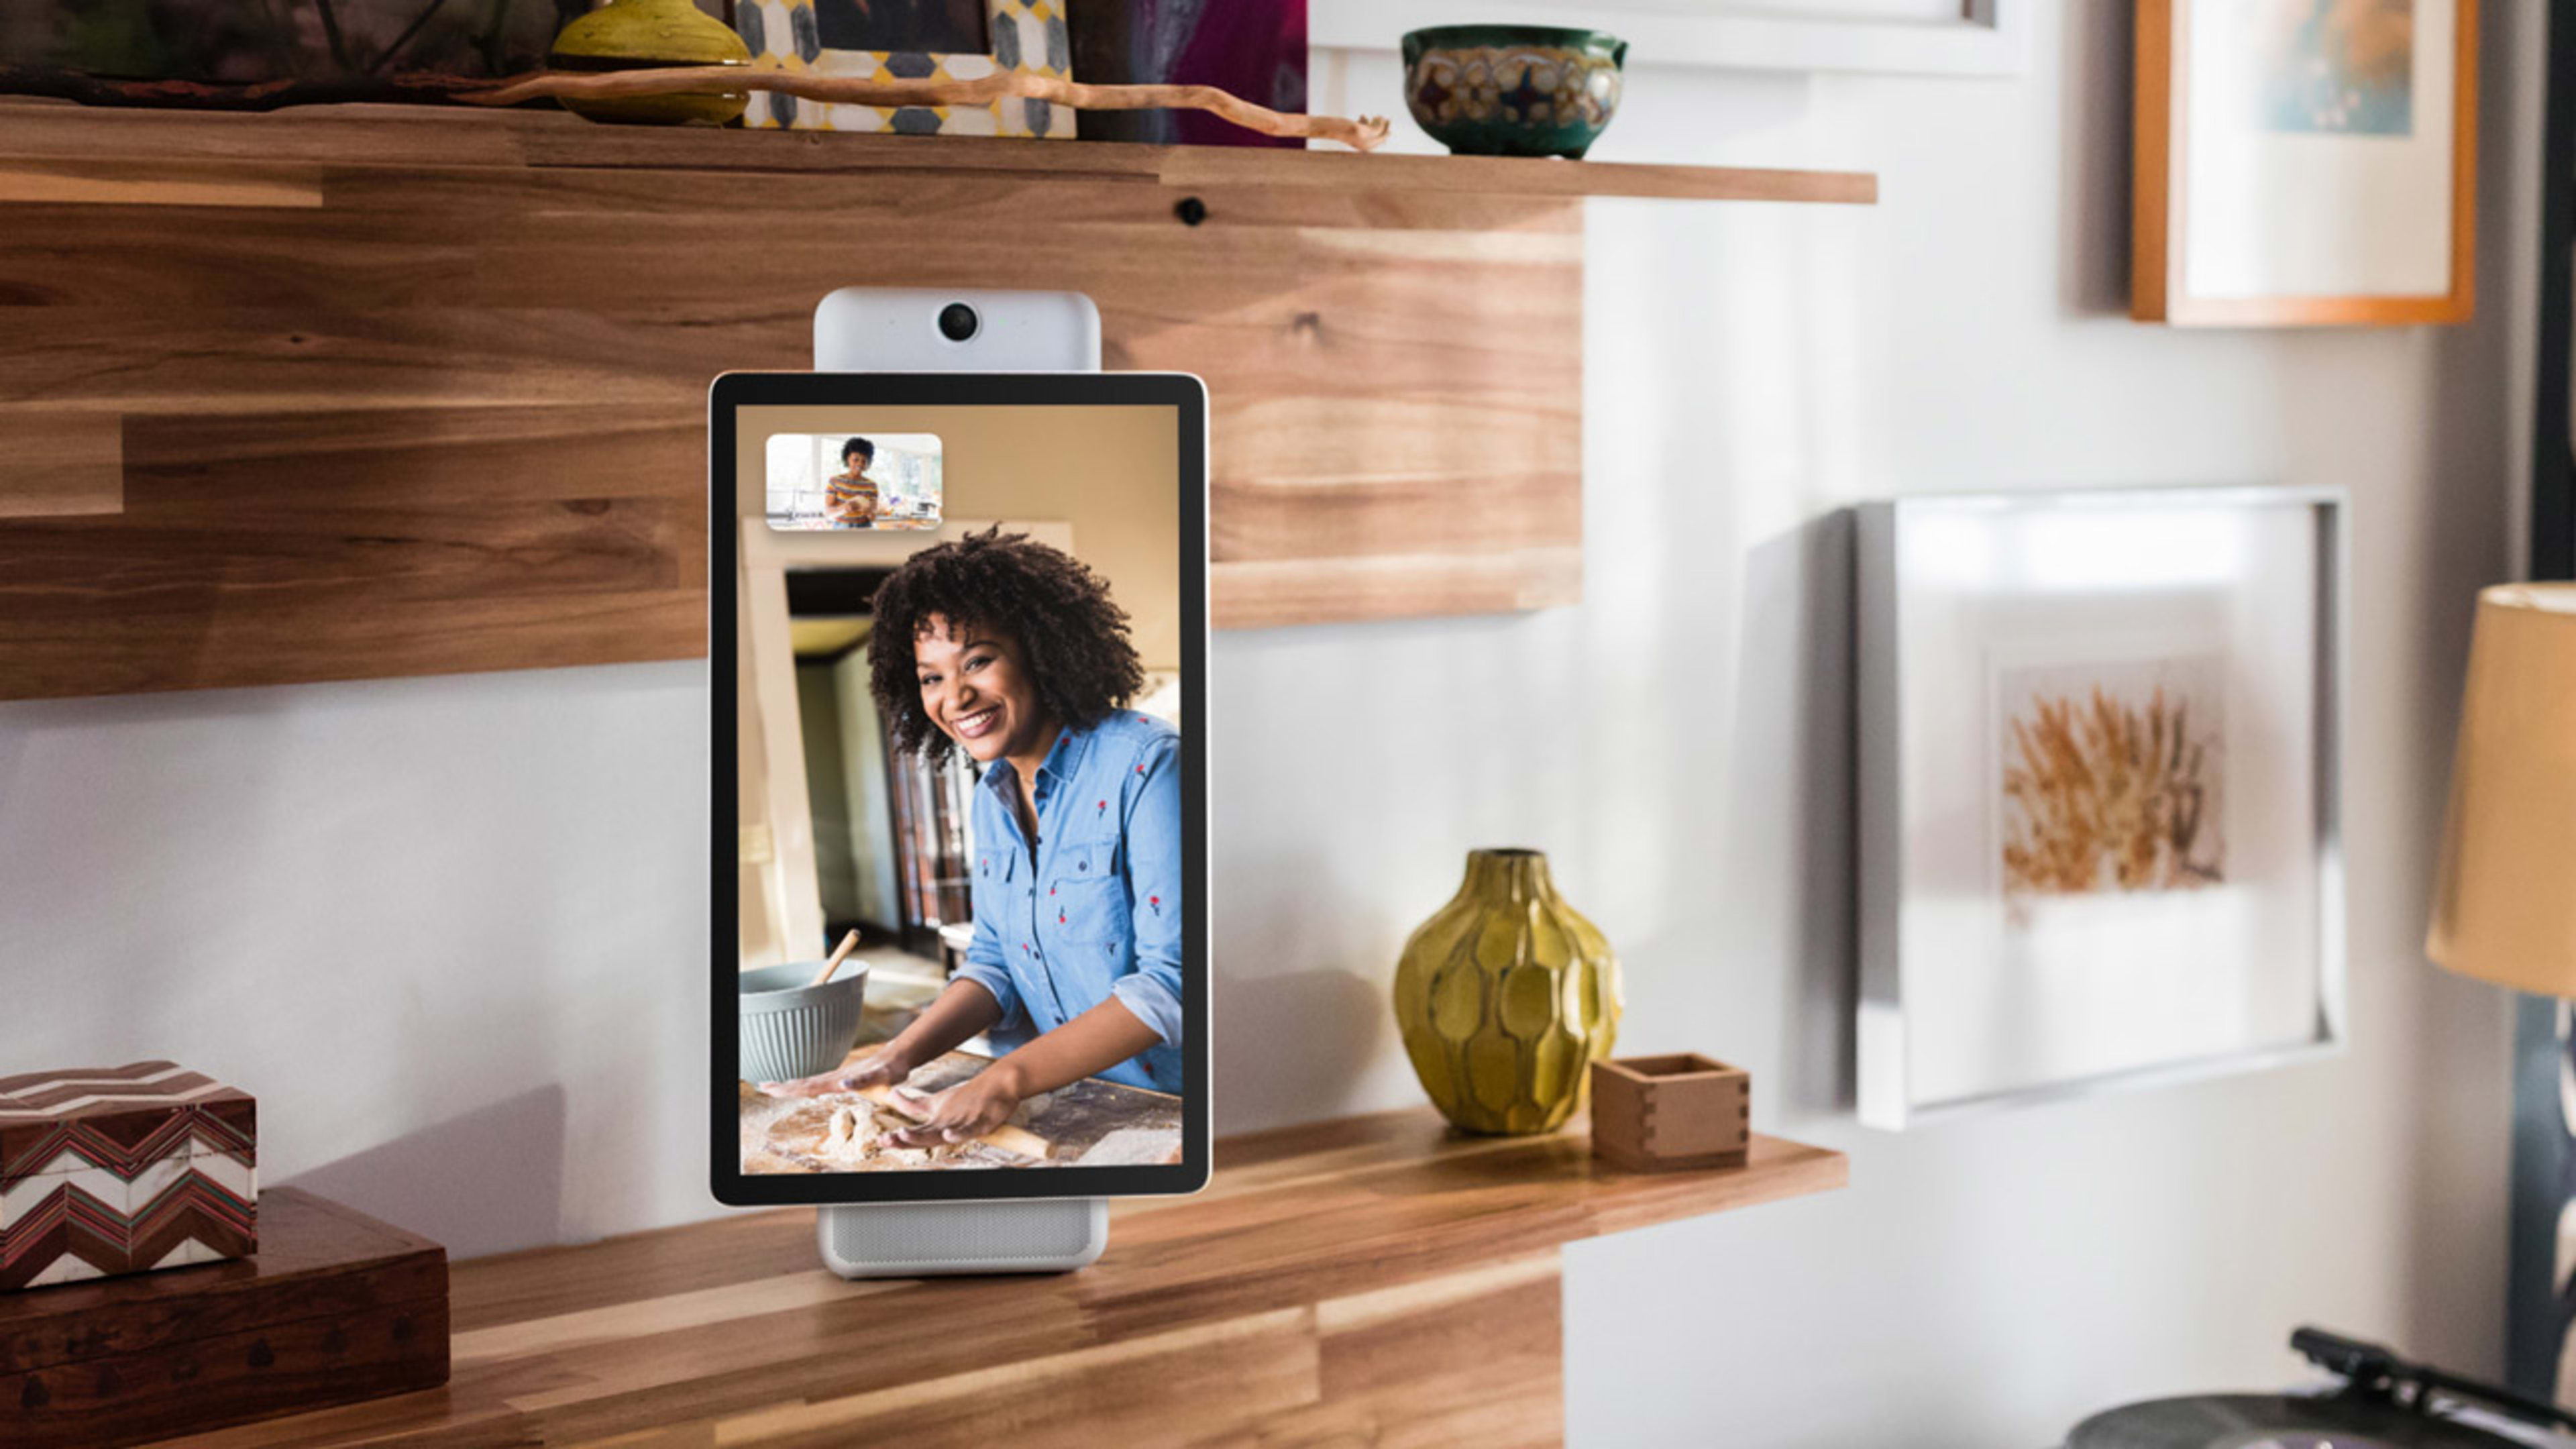 Facebook’s Portal learned its video skills from some of Hollywood’s best cameramen